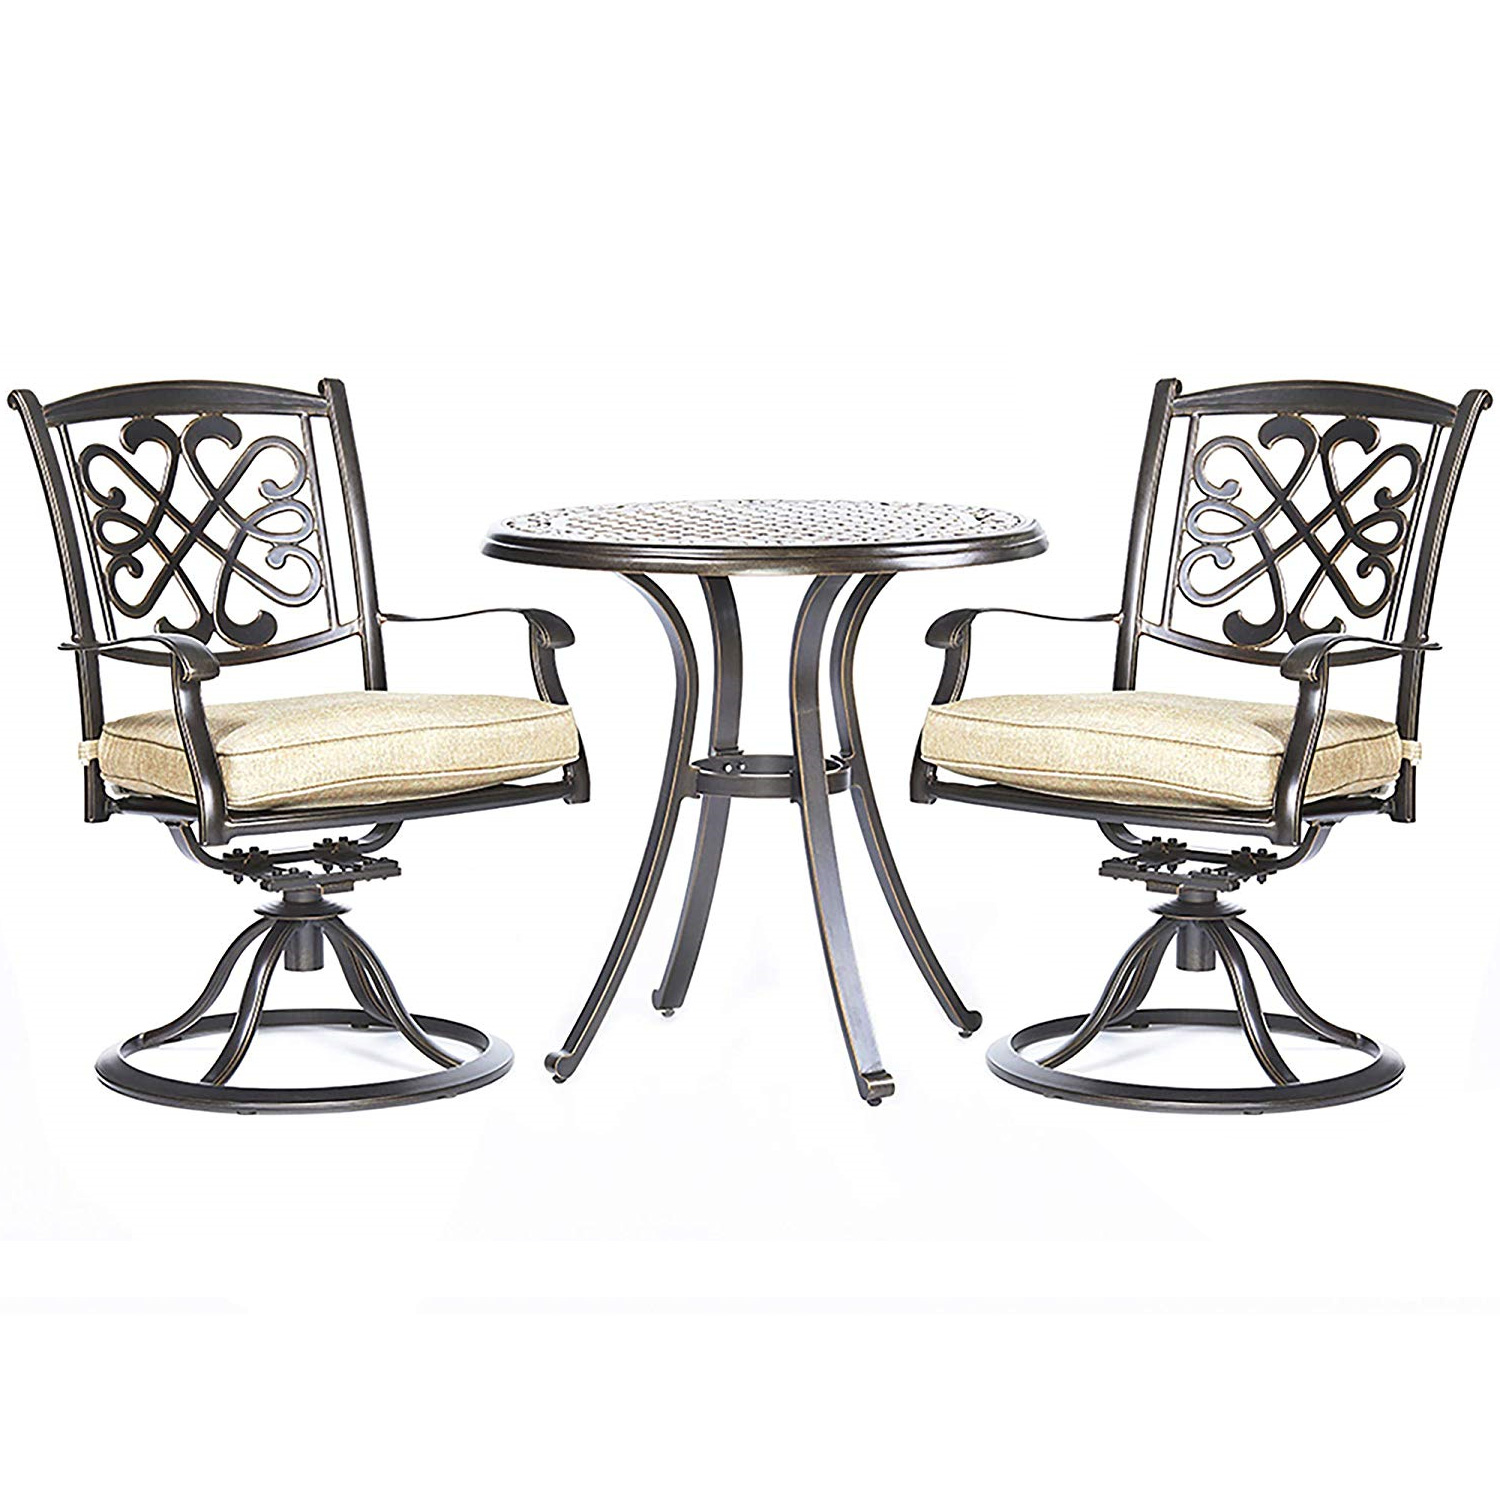 3 Piece Bistro Table Chairs Set, Cast Aluminum Dining Table Patio Glider Chairs Garden Backyard Outdoor Furniture - image 1 of 7